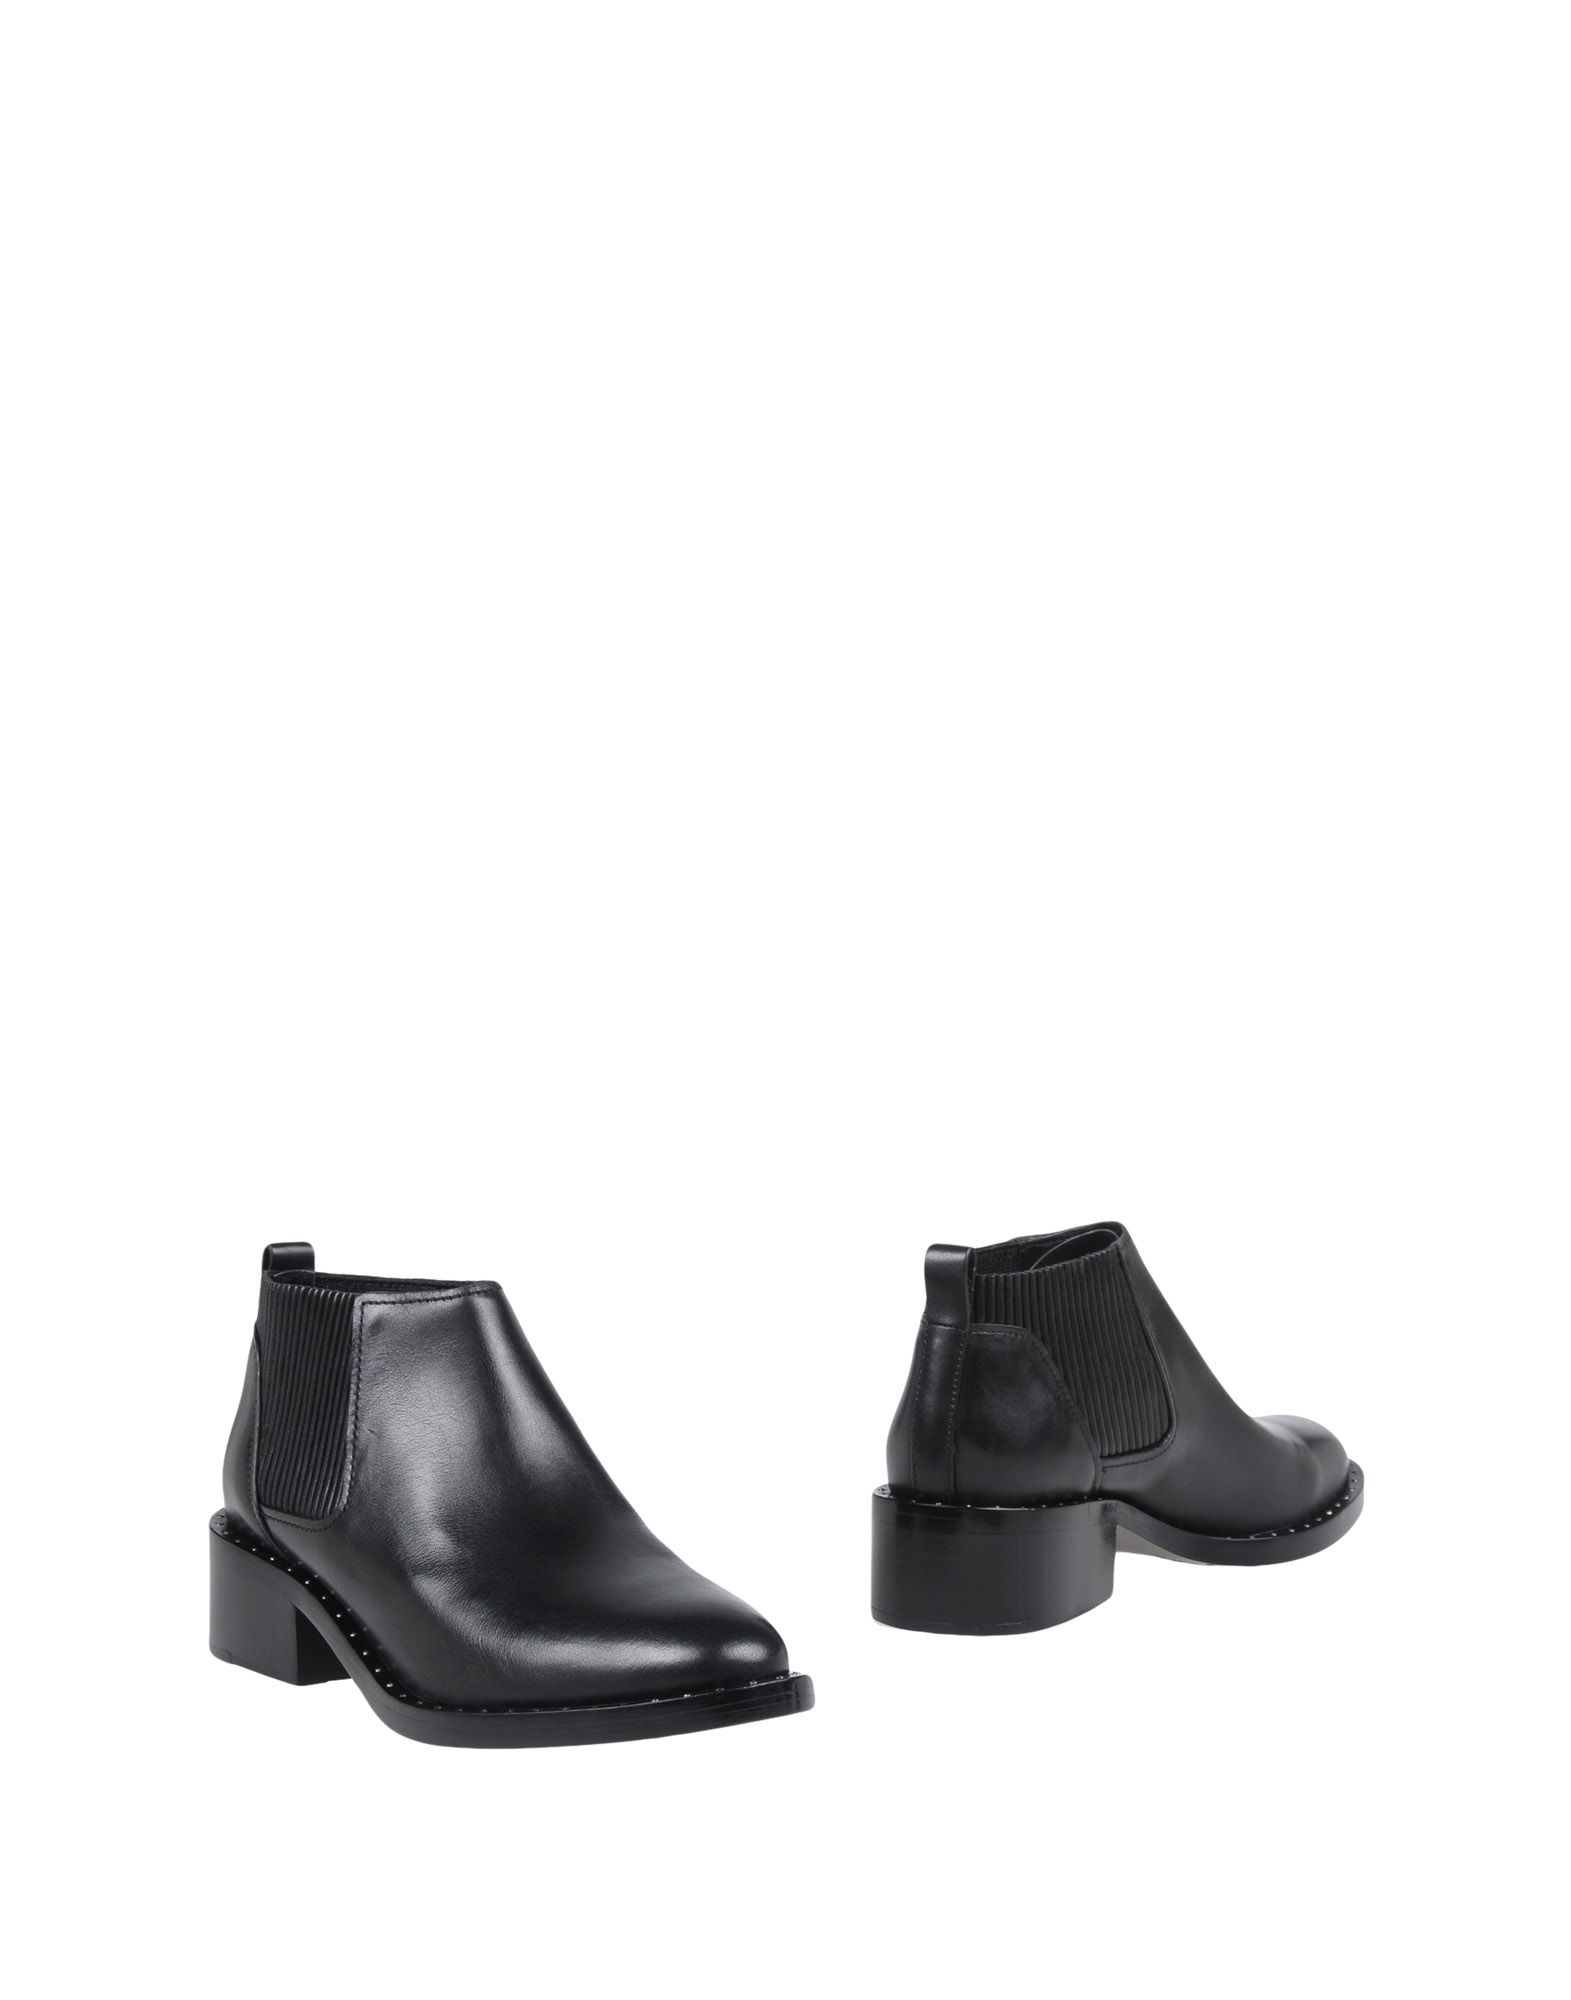 3.1 PHILLIP LIM / フィリップ リム Ankle boot,11423887DO 13